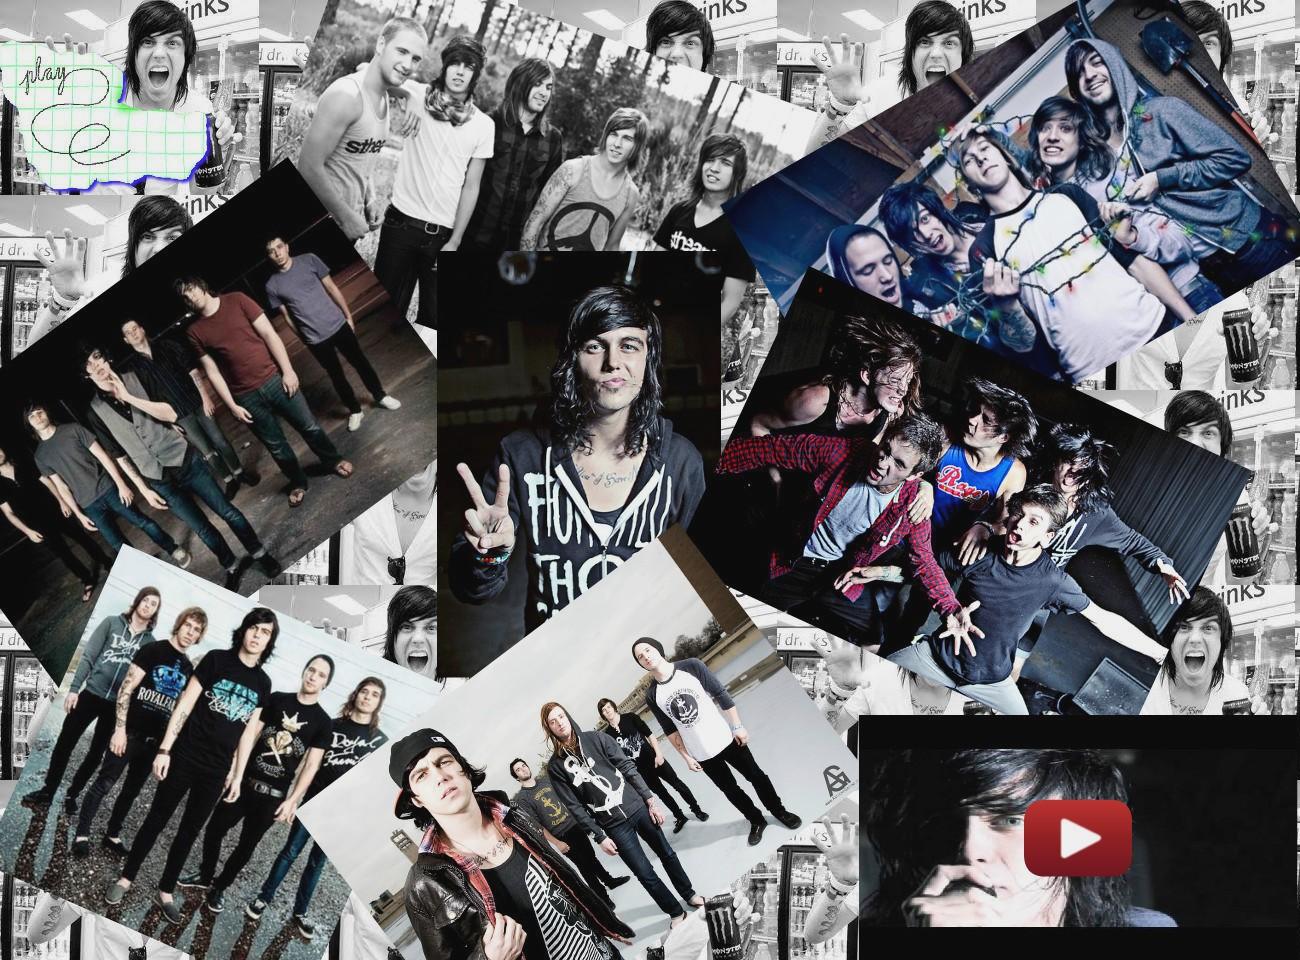 Sleeping With Sirens Images Sleeping With Sirens Wallpaper - Collage Sleeping With Sirens - HD Wallpaper 